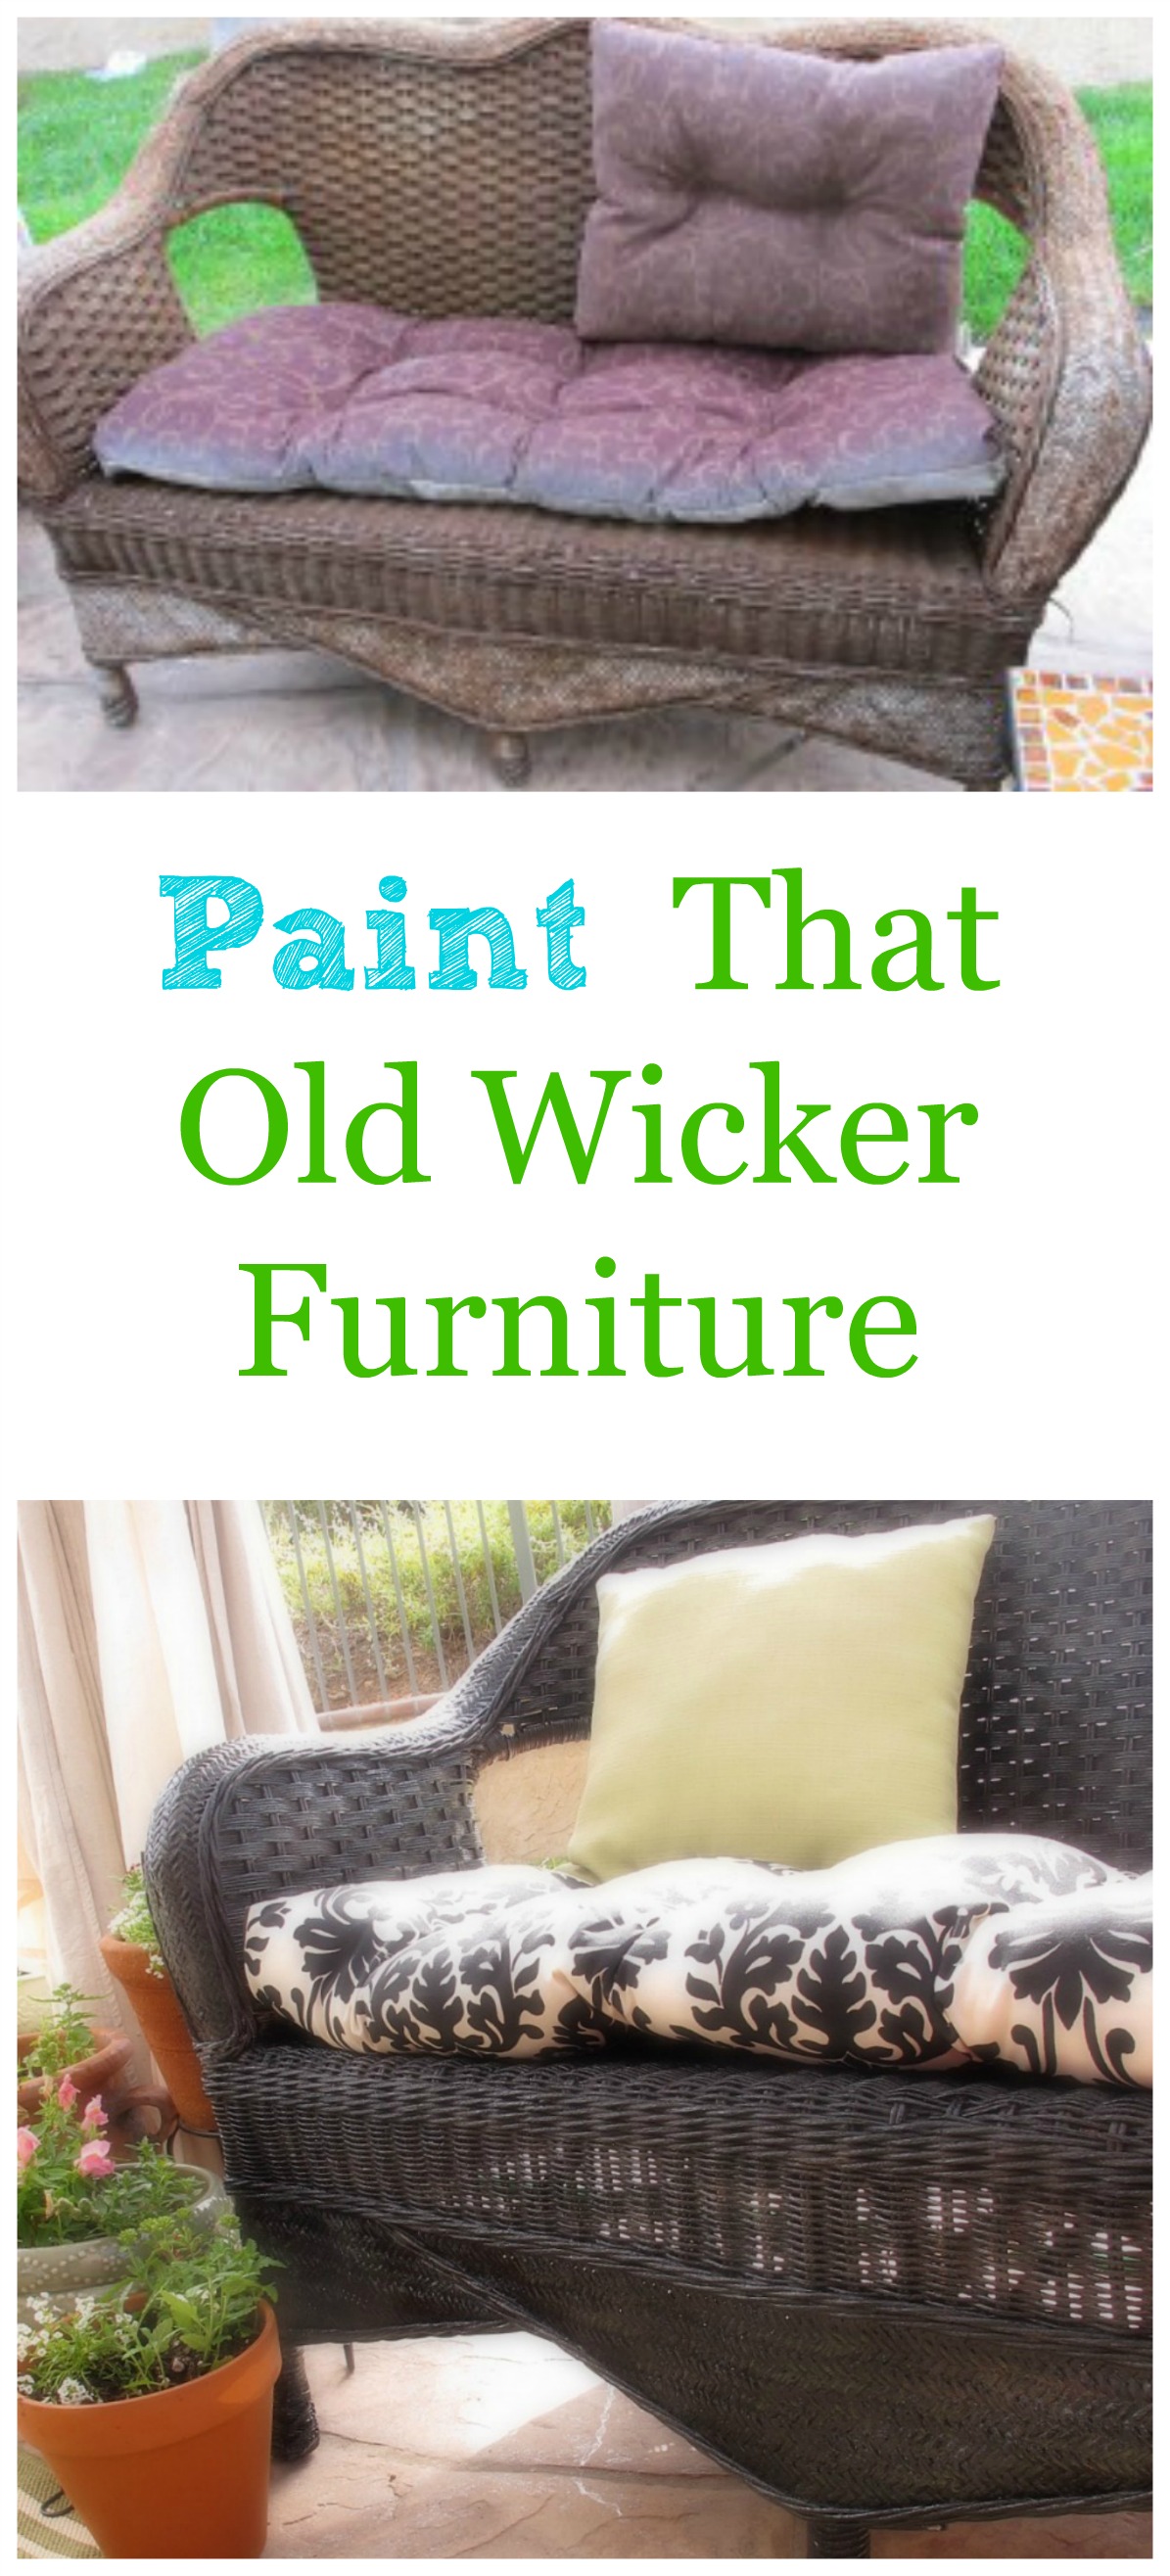 Outdoor Wicker Furniture Painting Ideas - fashiondesignst